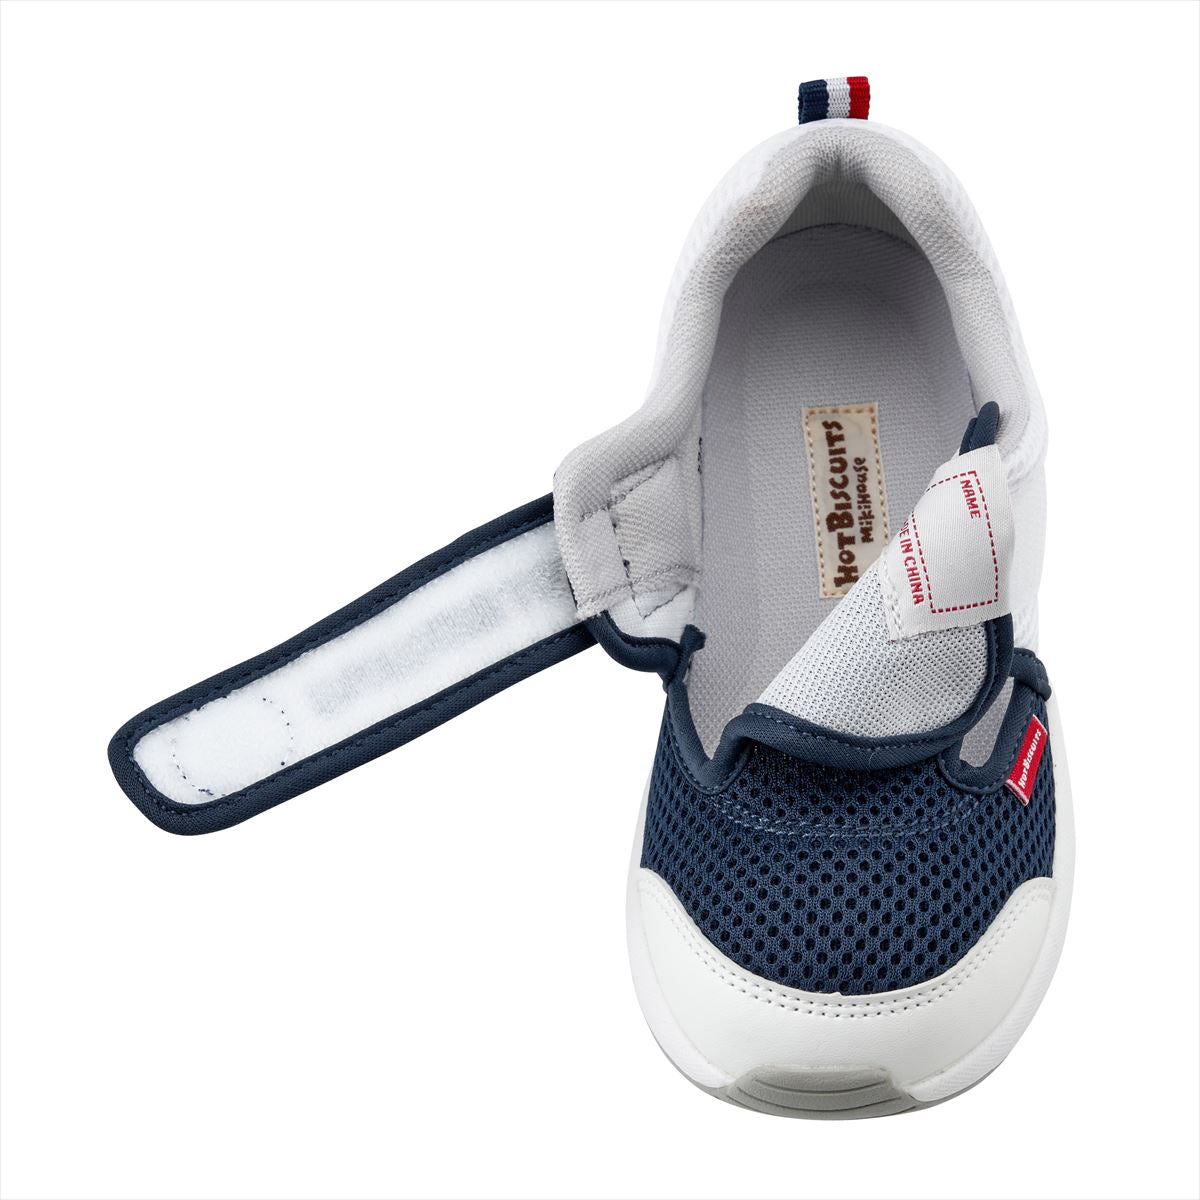 Double Russell Mesh Sneakers for Kids - HB Marine